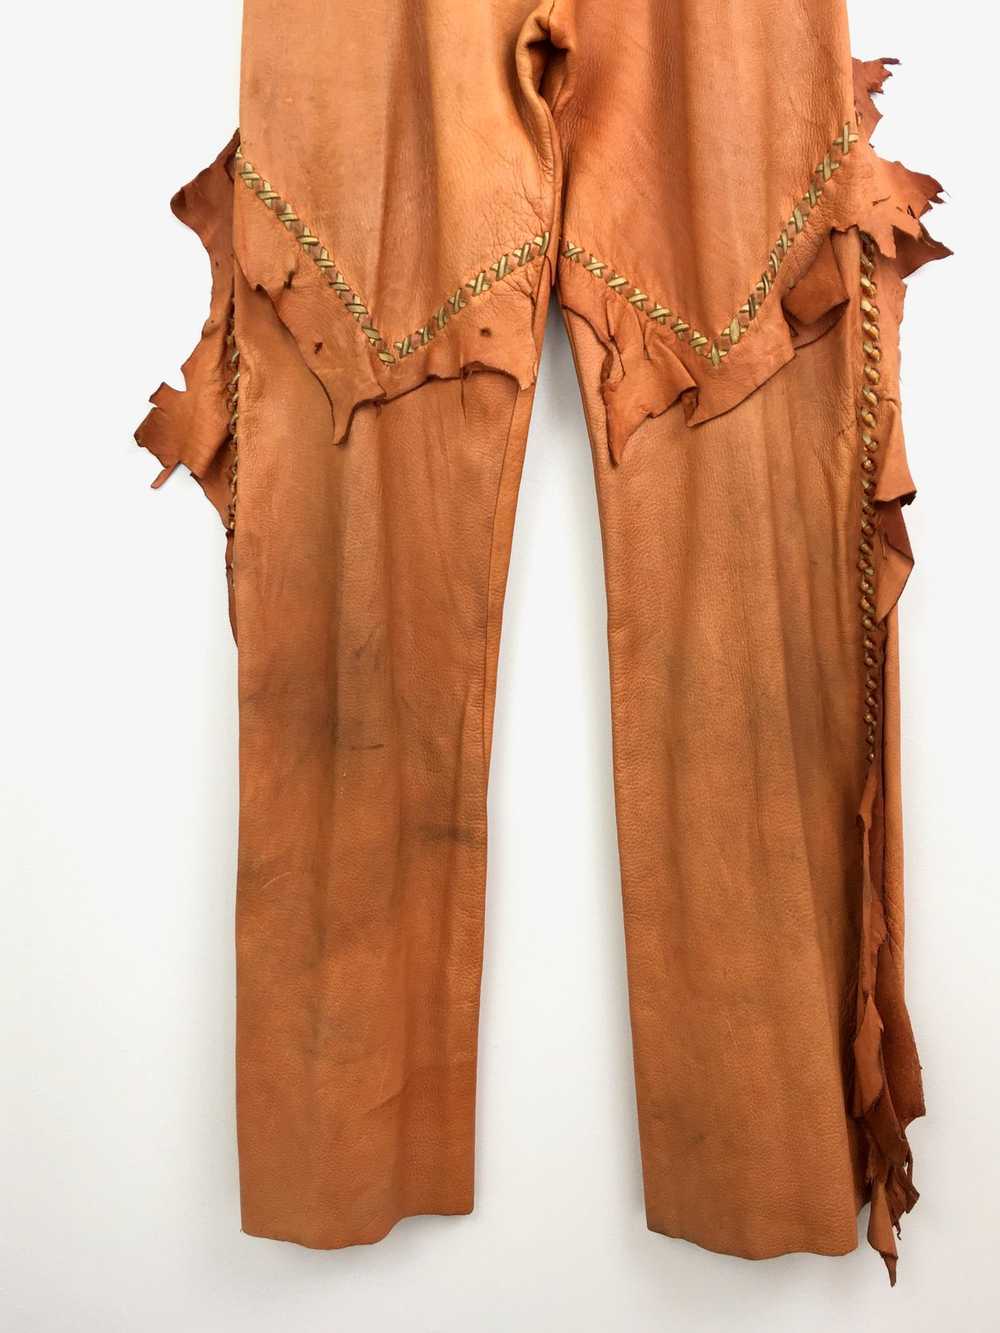 1970s Clifford Olson Artisan Made Leather Pants - image 3